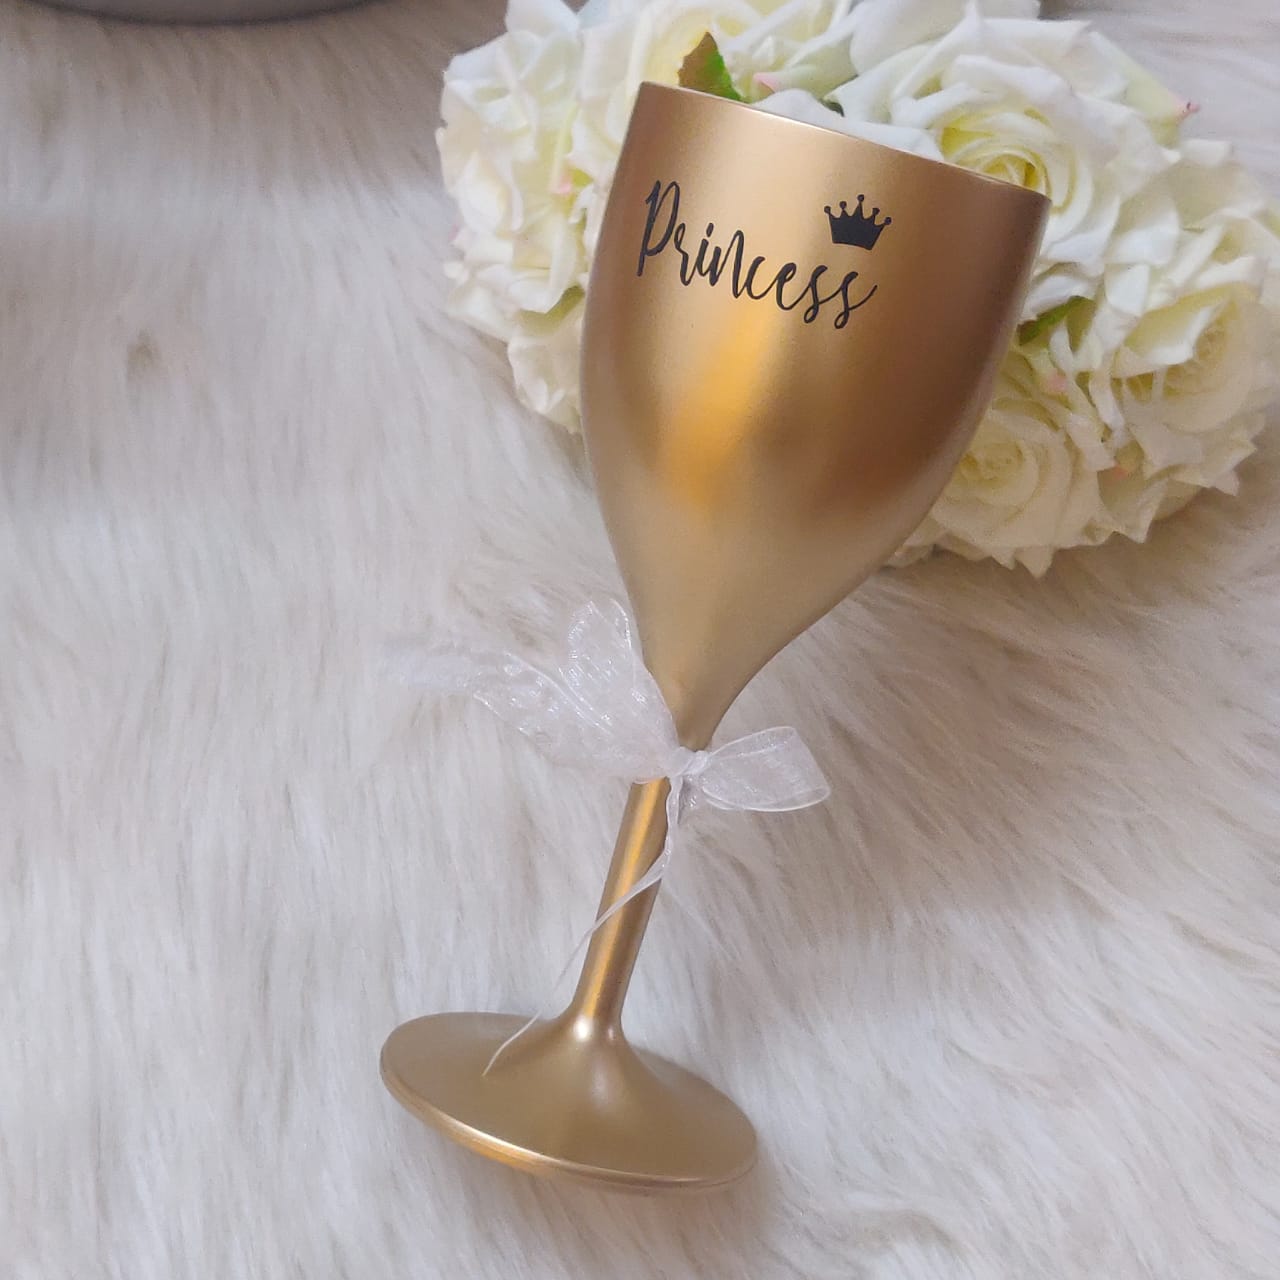 Unbreakable Wine Glass with Customisable Name - Set of 1 Gold